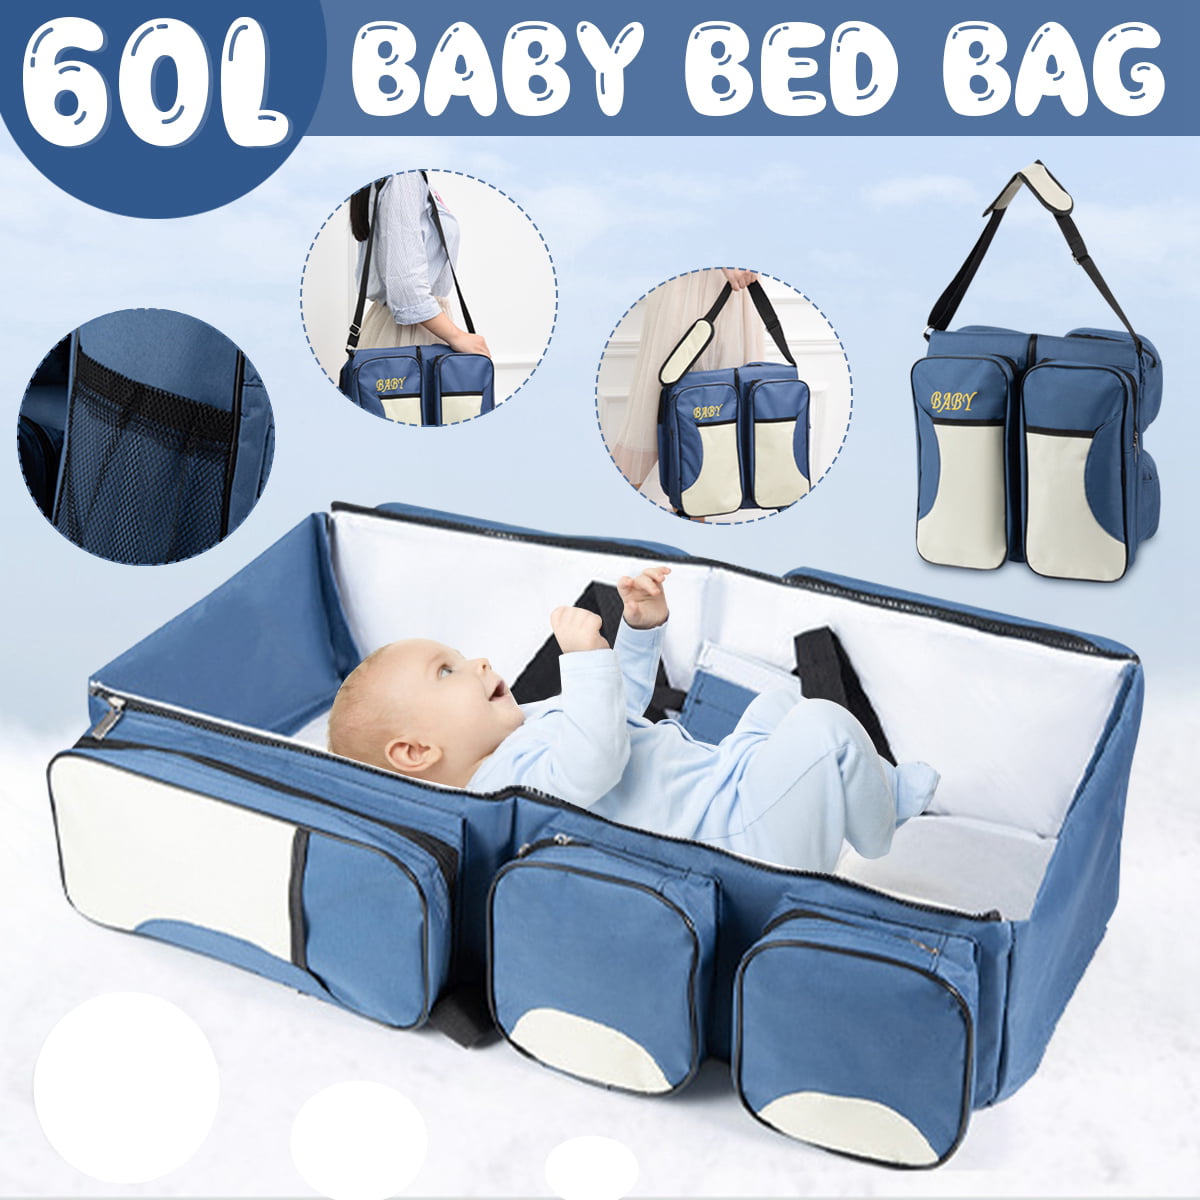 Baby Travel 3in1 Changing Station Baby Crib Diaper Bag Bassinet Outdoor Portable 